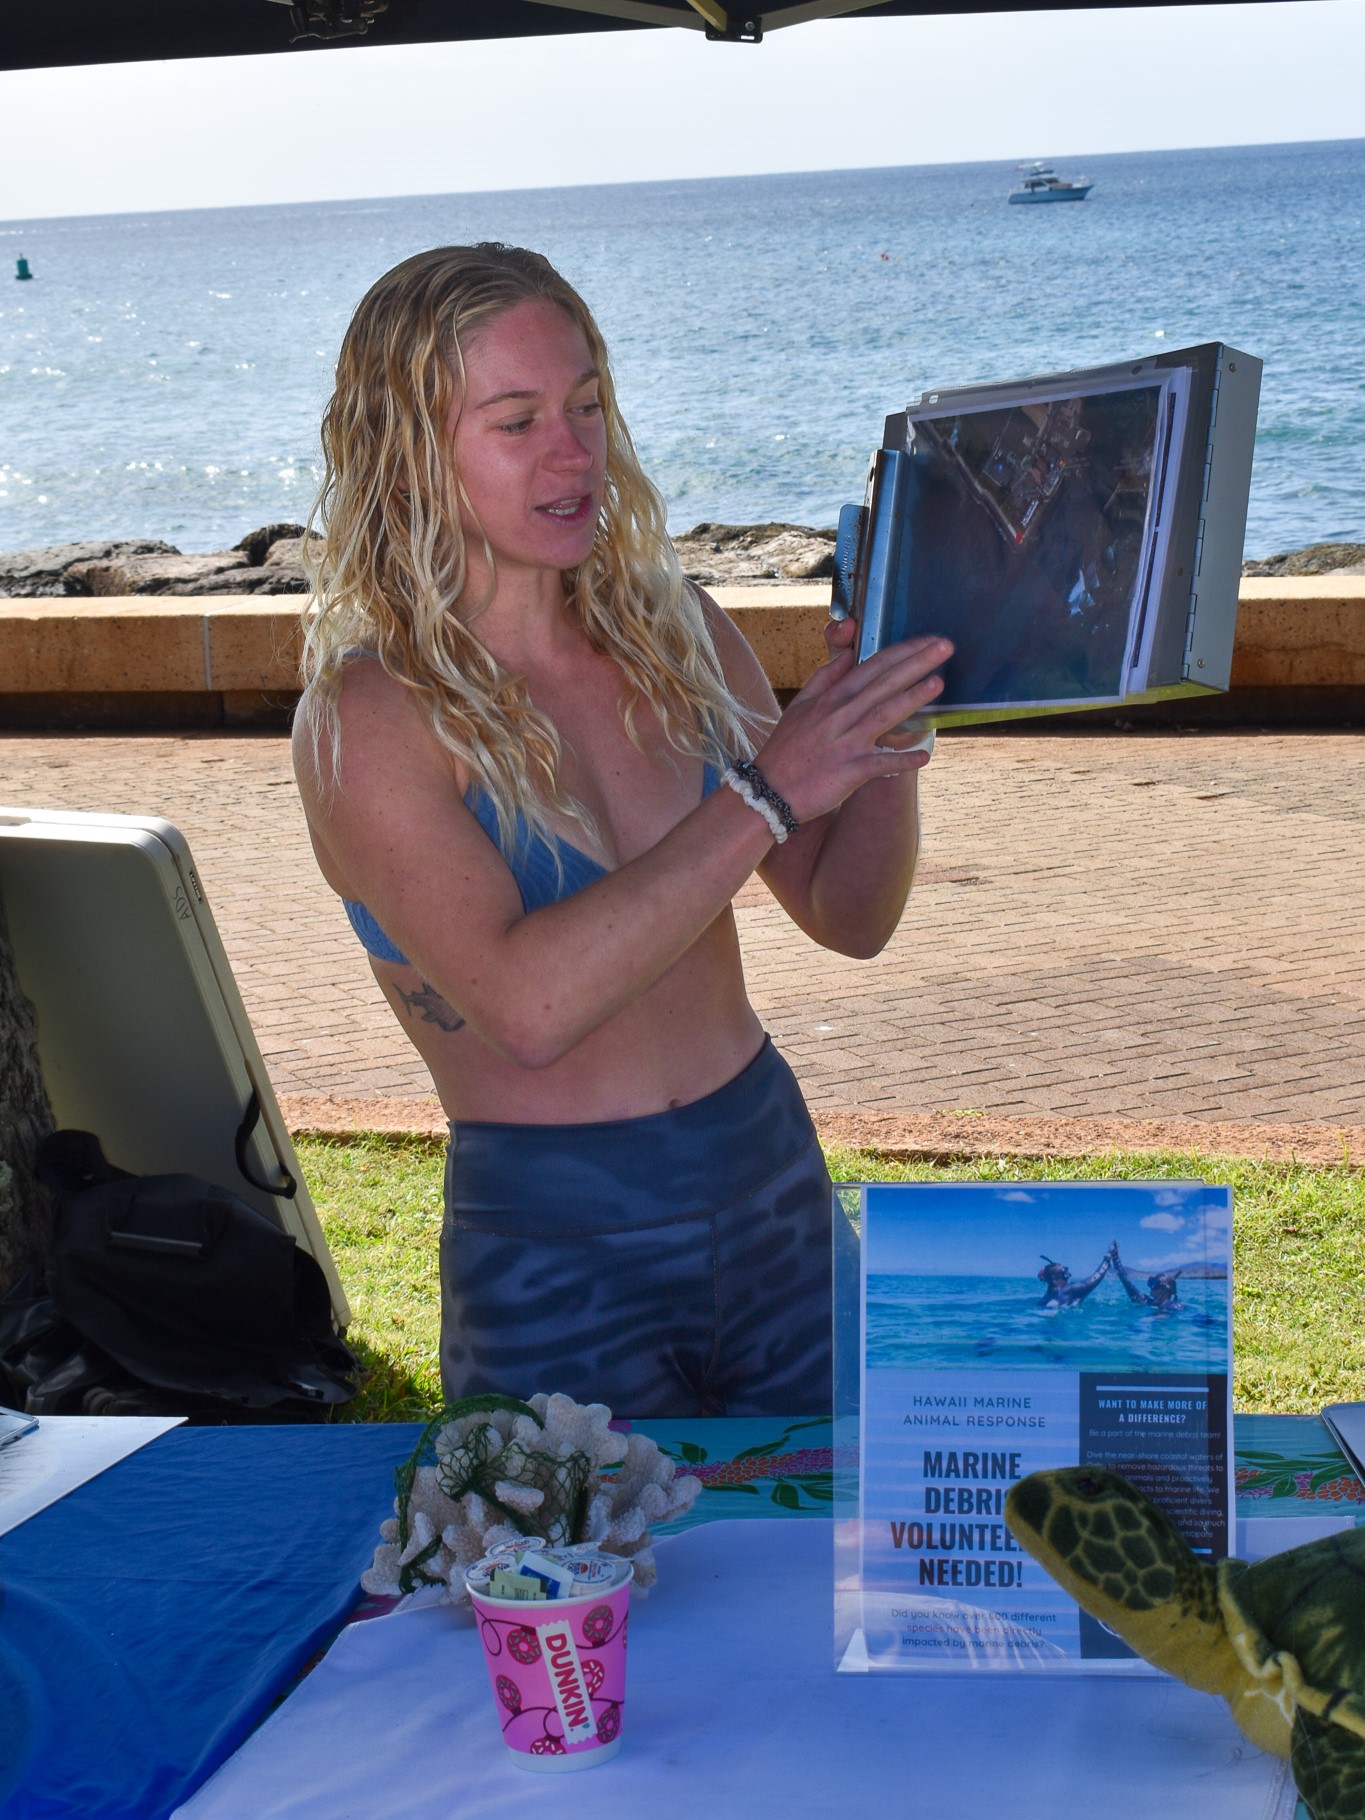 Jace Reinken, HMAR's Marine Debris Program led holding a clipboard with an image of the dive site at Point Panic while providing a briefing